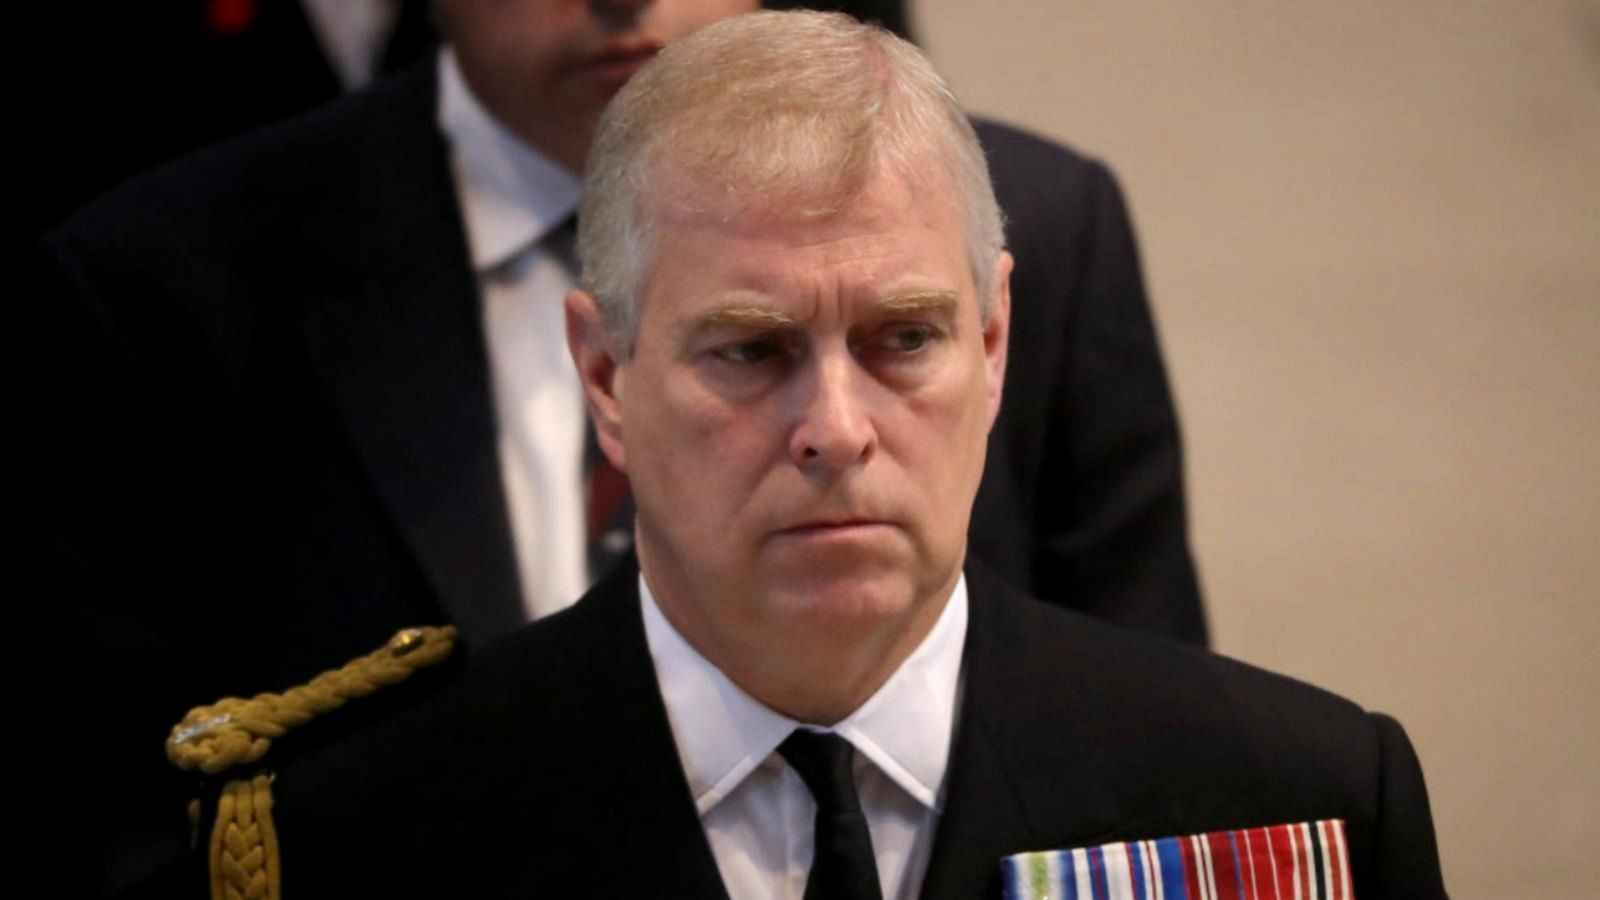 Britain S Prince Andrew Denies He Had Sex With A Teenager In 2001